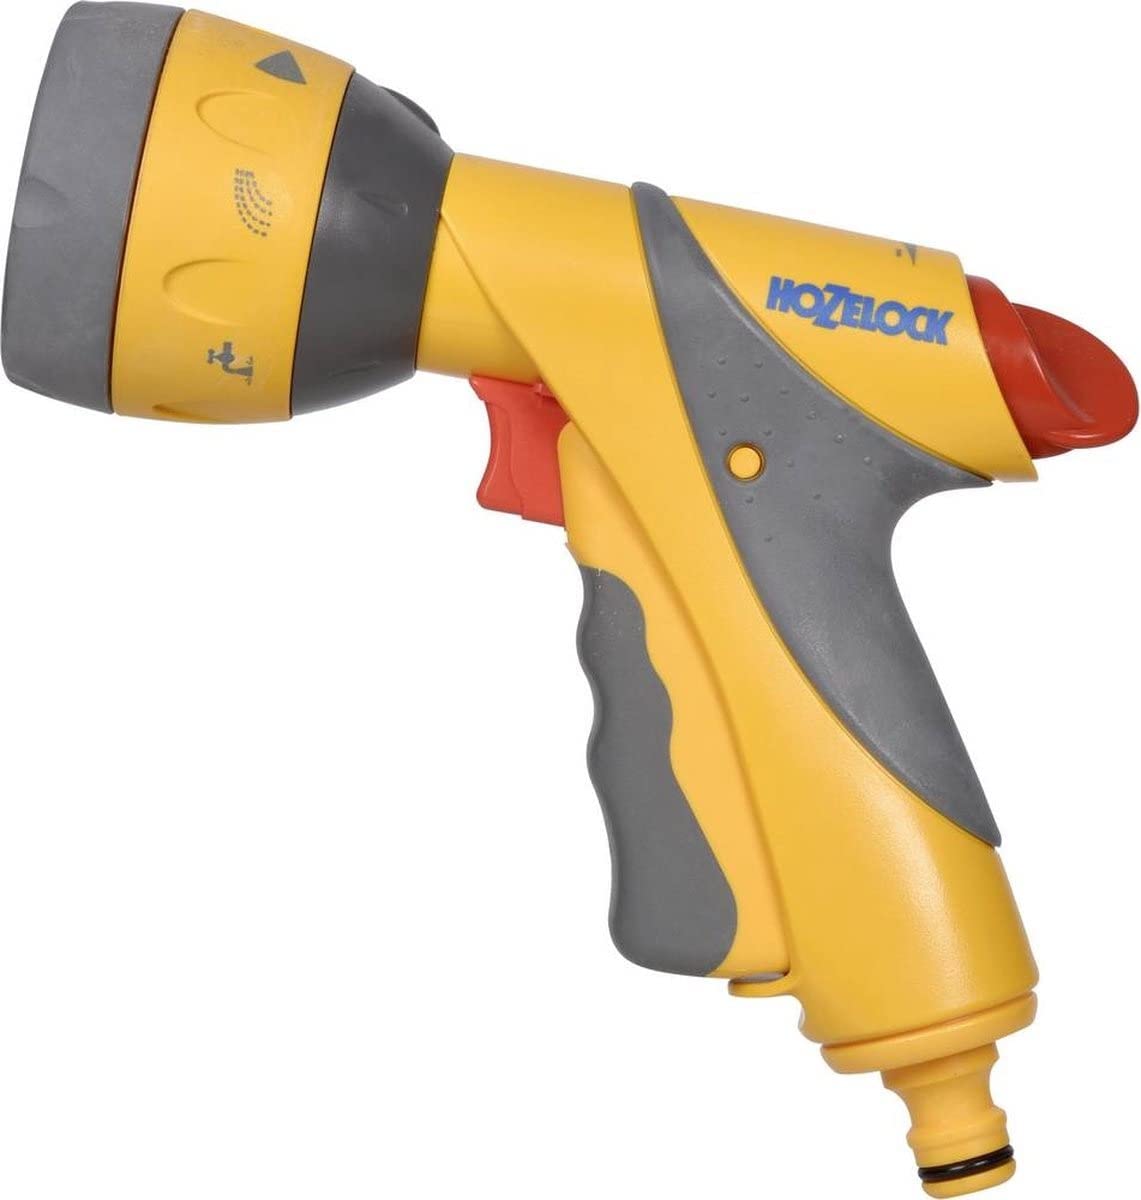 HOZELOCK - Multi-Jet Spray Gun Plus : Ideal for Daily or Intensive Use, Multi-task Gun, Ergonomic, Easy-to-use, Lockable and Flow-controlled: 6 Spray Patterns [2684P0000]